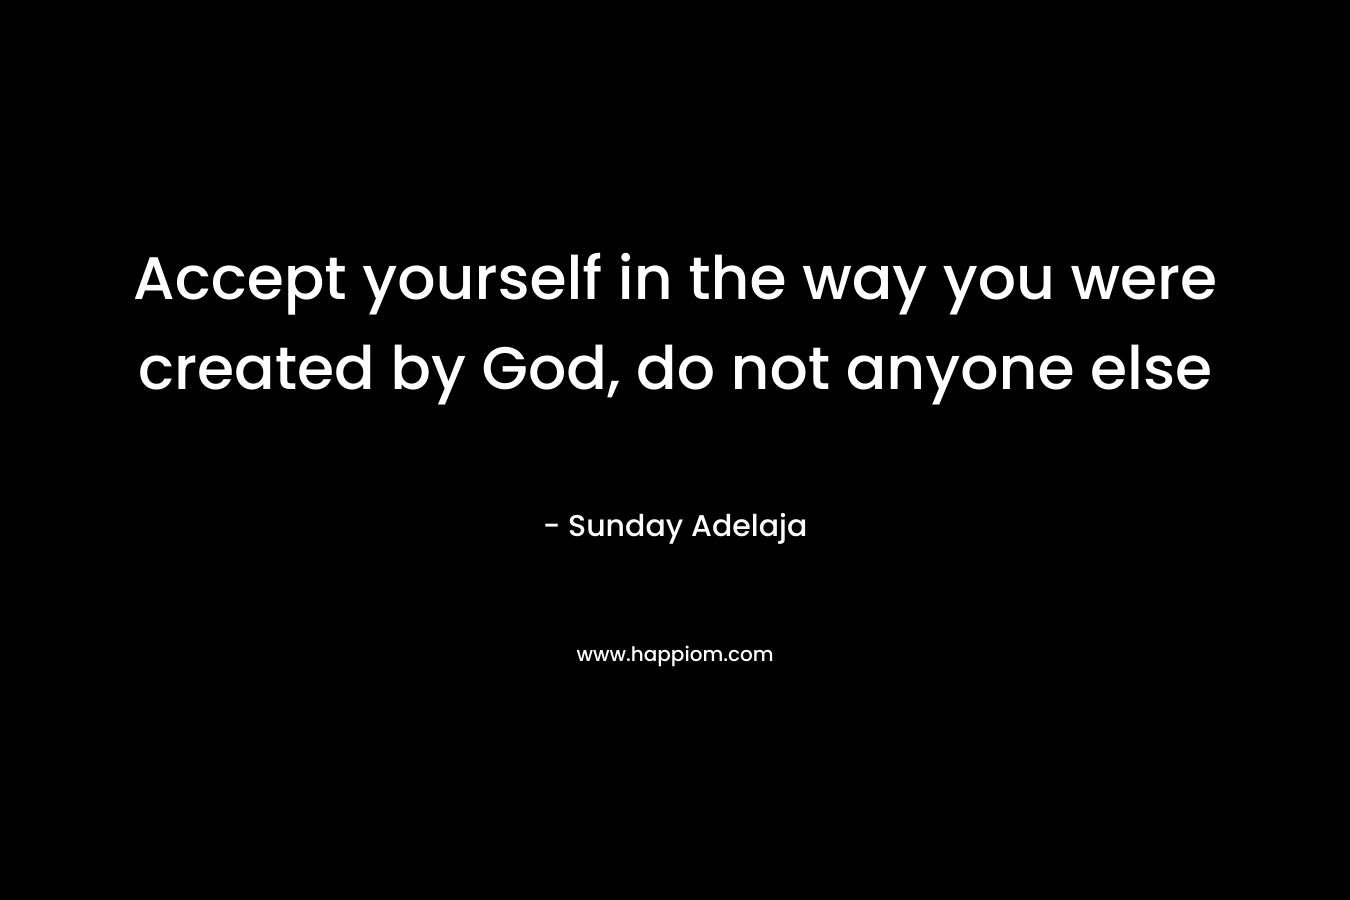 Accept yourself in the way you were created by God, do not anyone else